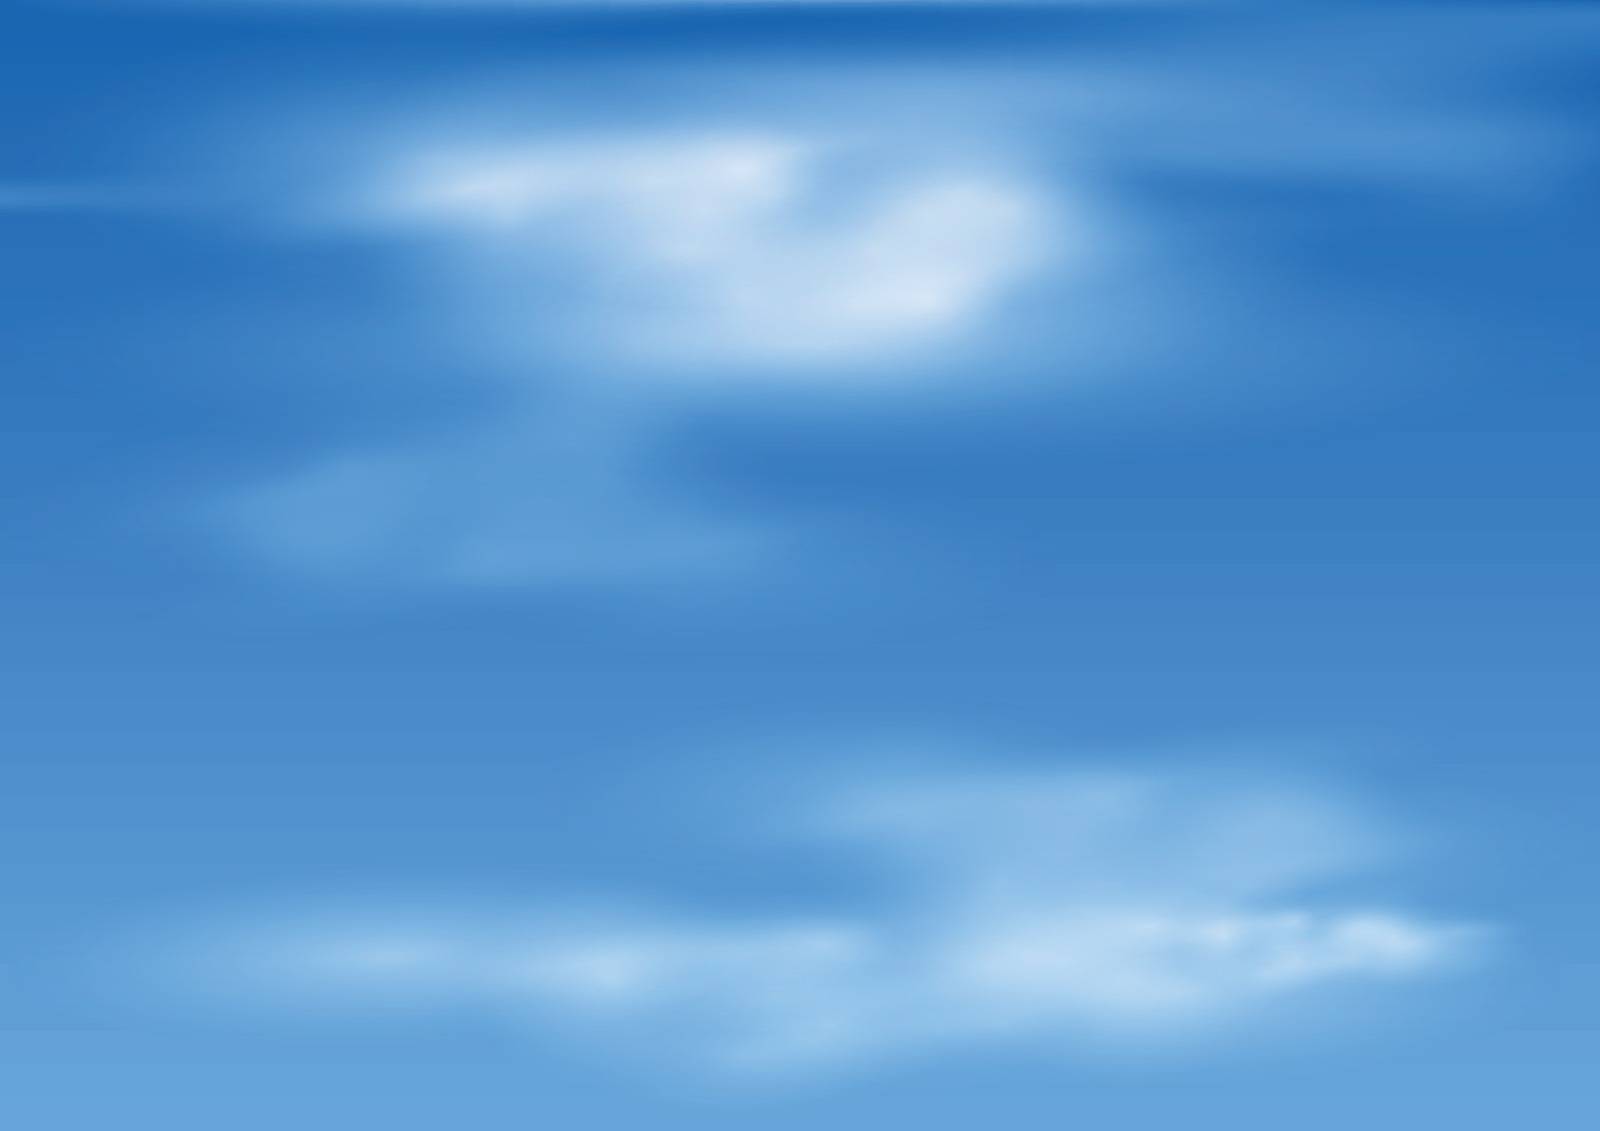 Clouds in the Sky - Background Illustration, Vector